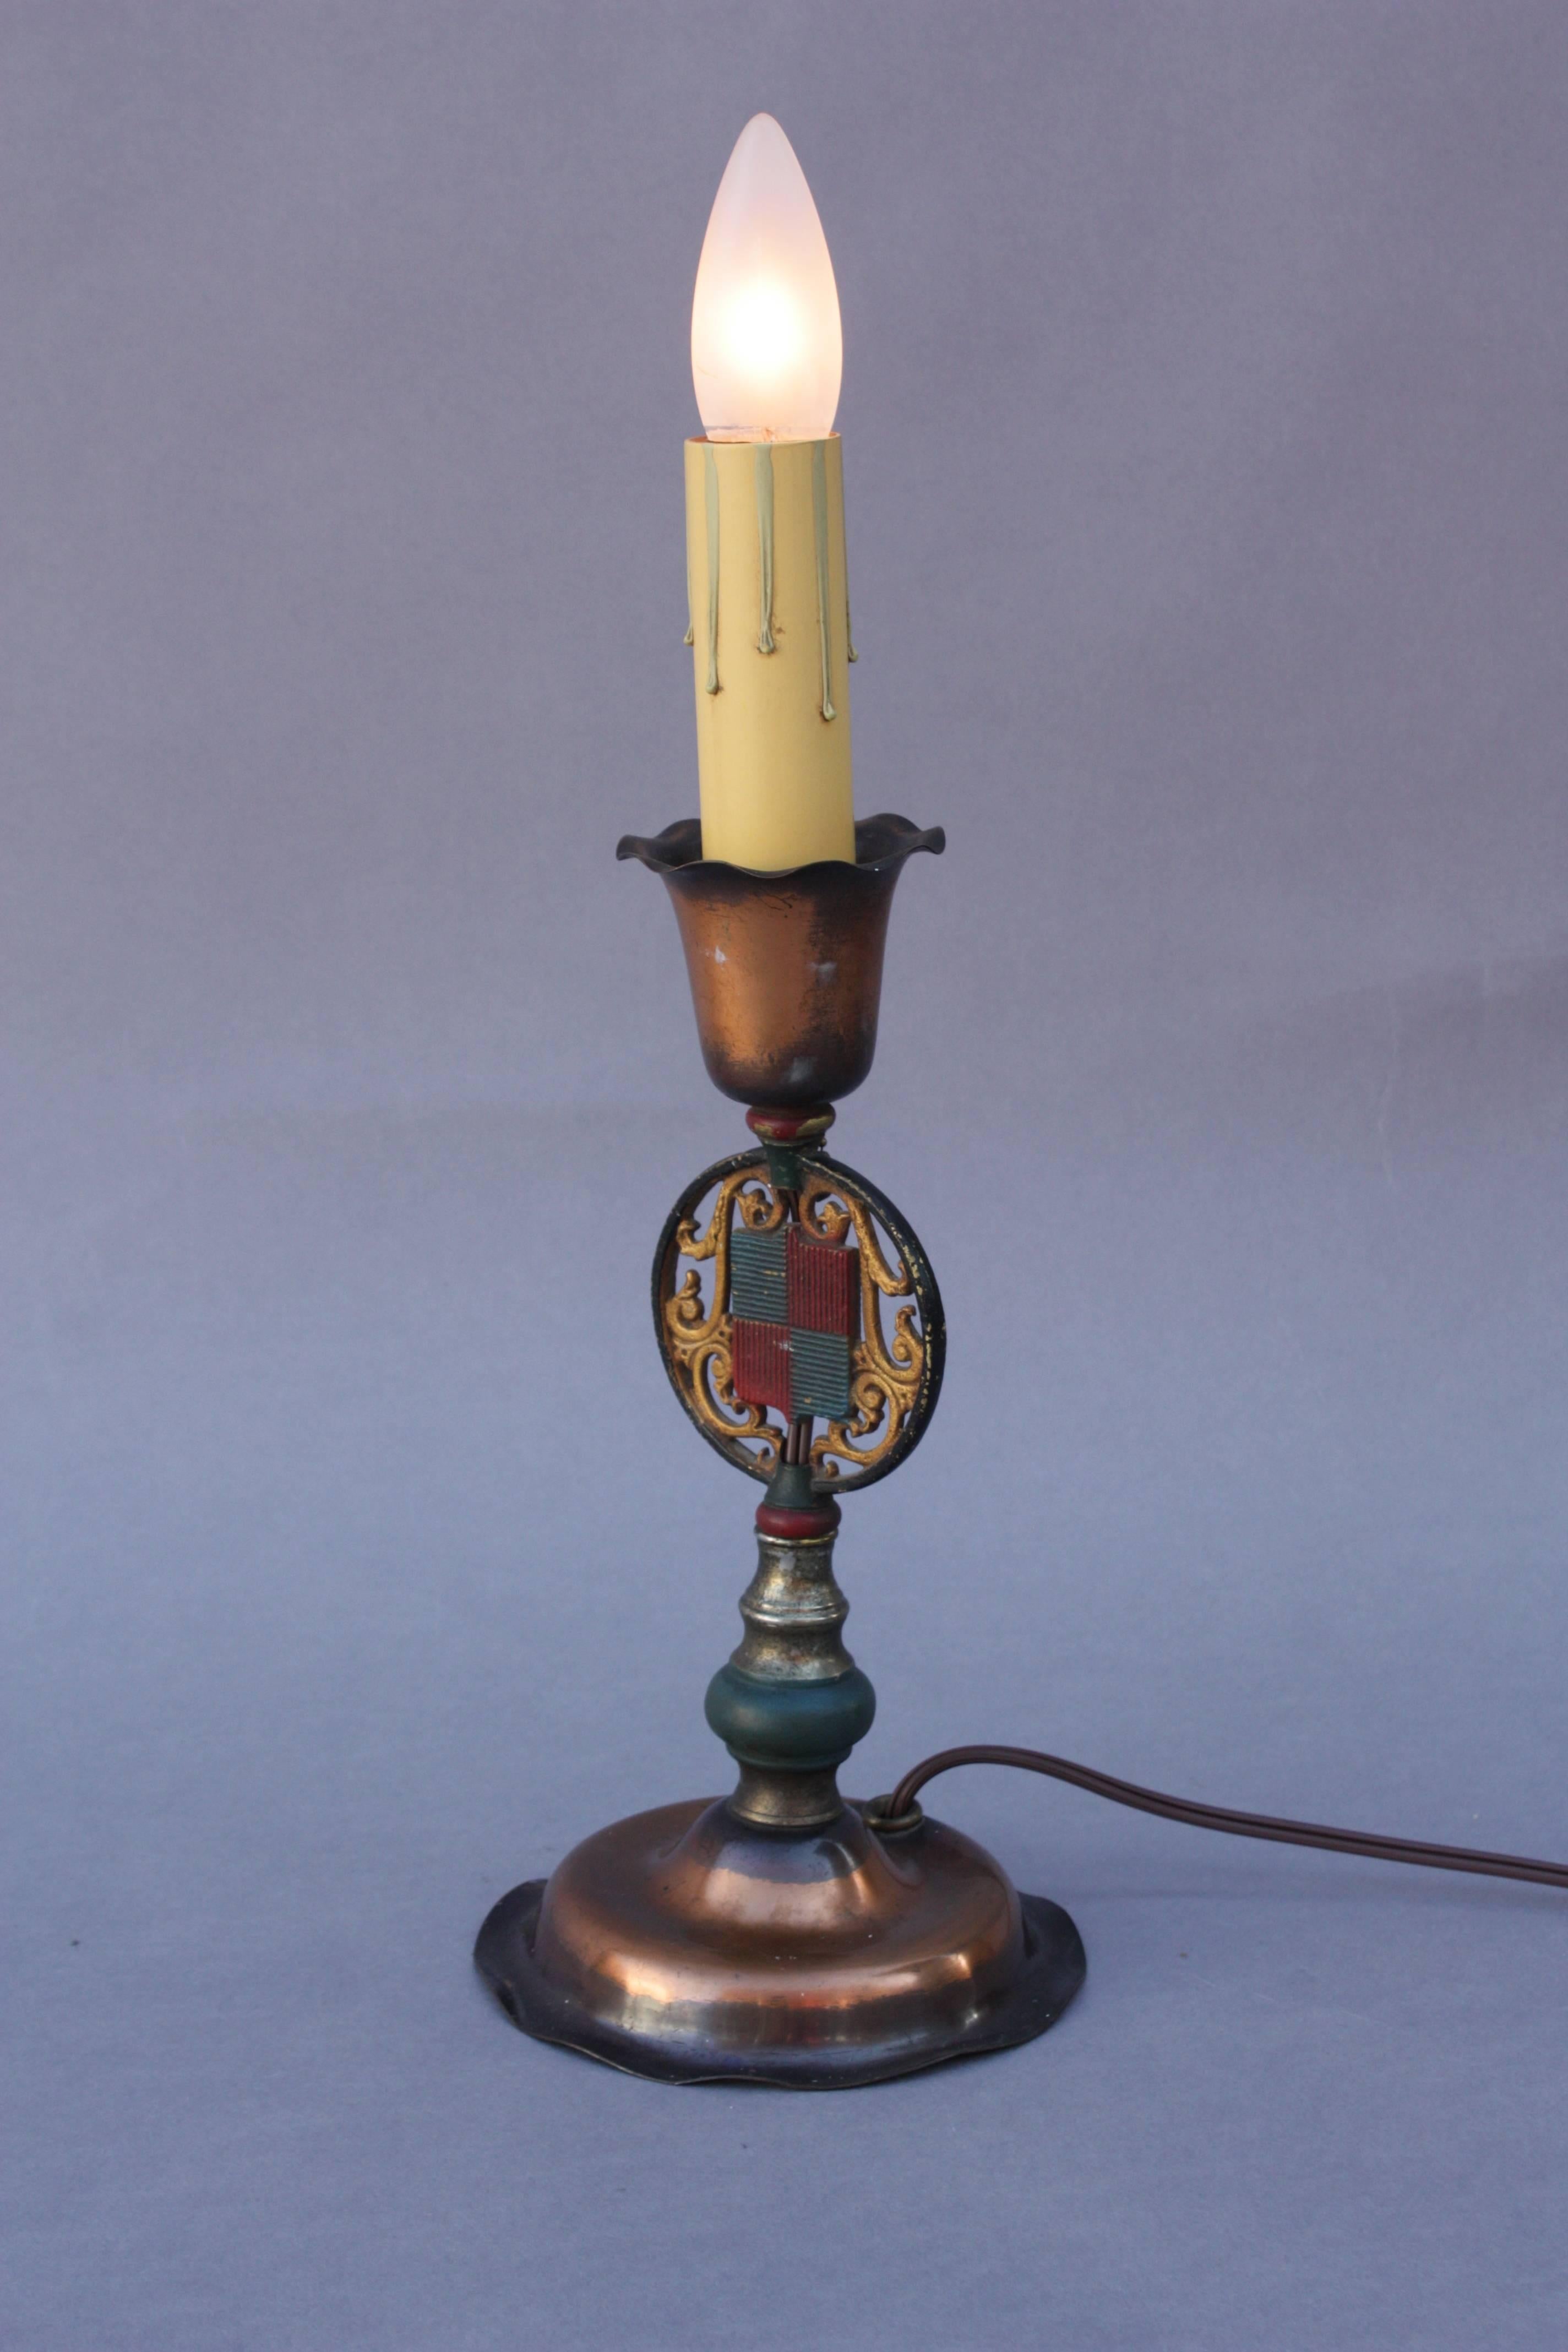 Spanish Colonial 1920s Spanish Revival Table Lamp with Crest Motif